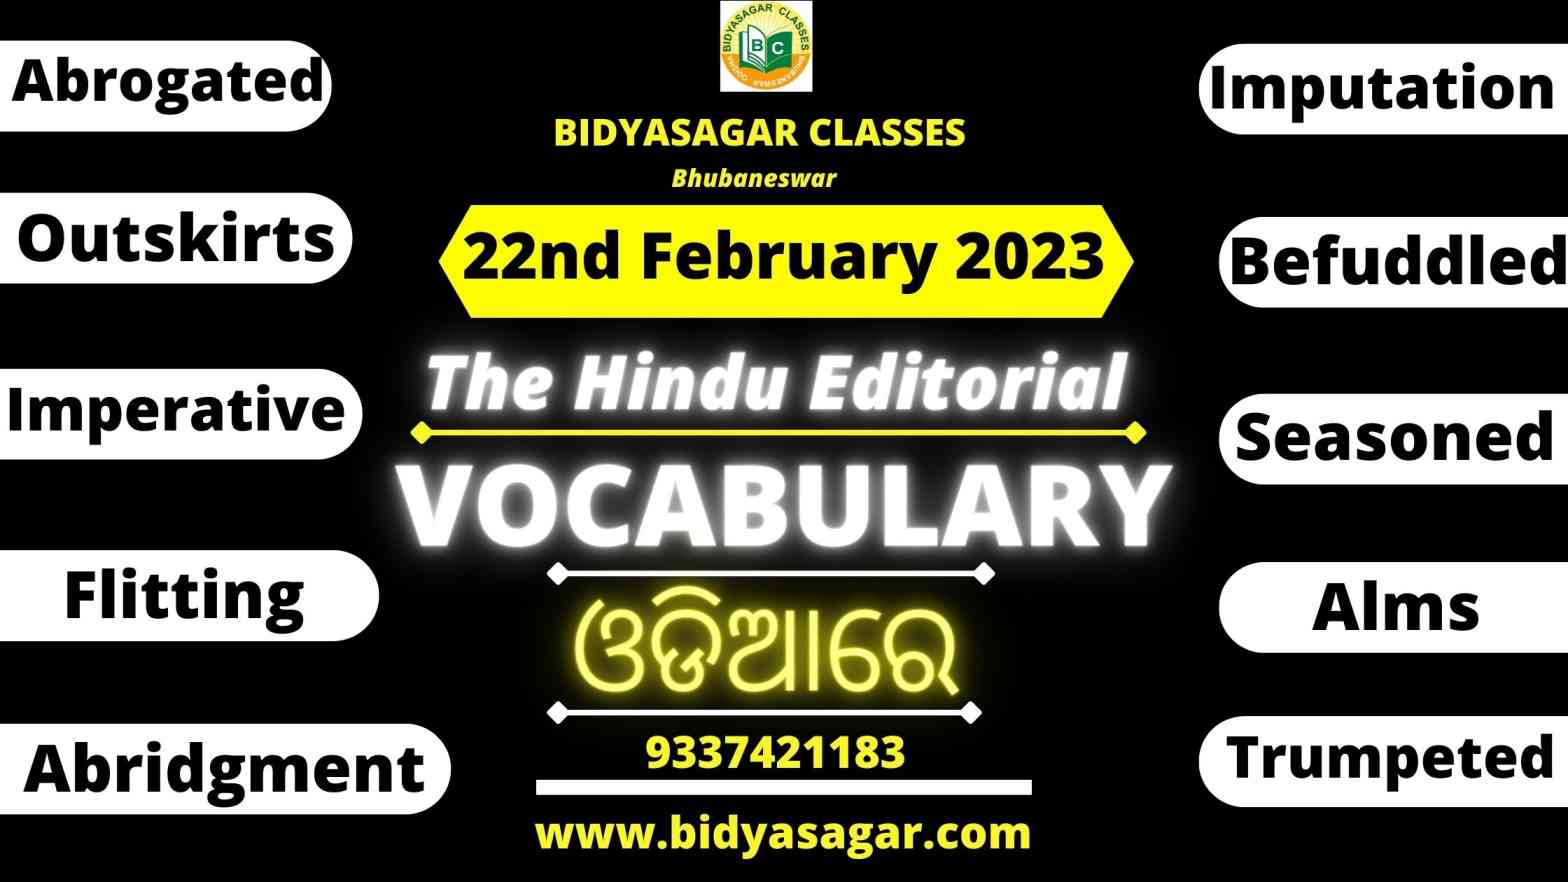 The Hindu Editorial Vocabulary of 22nd February 2023